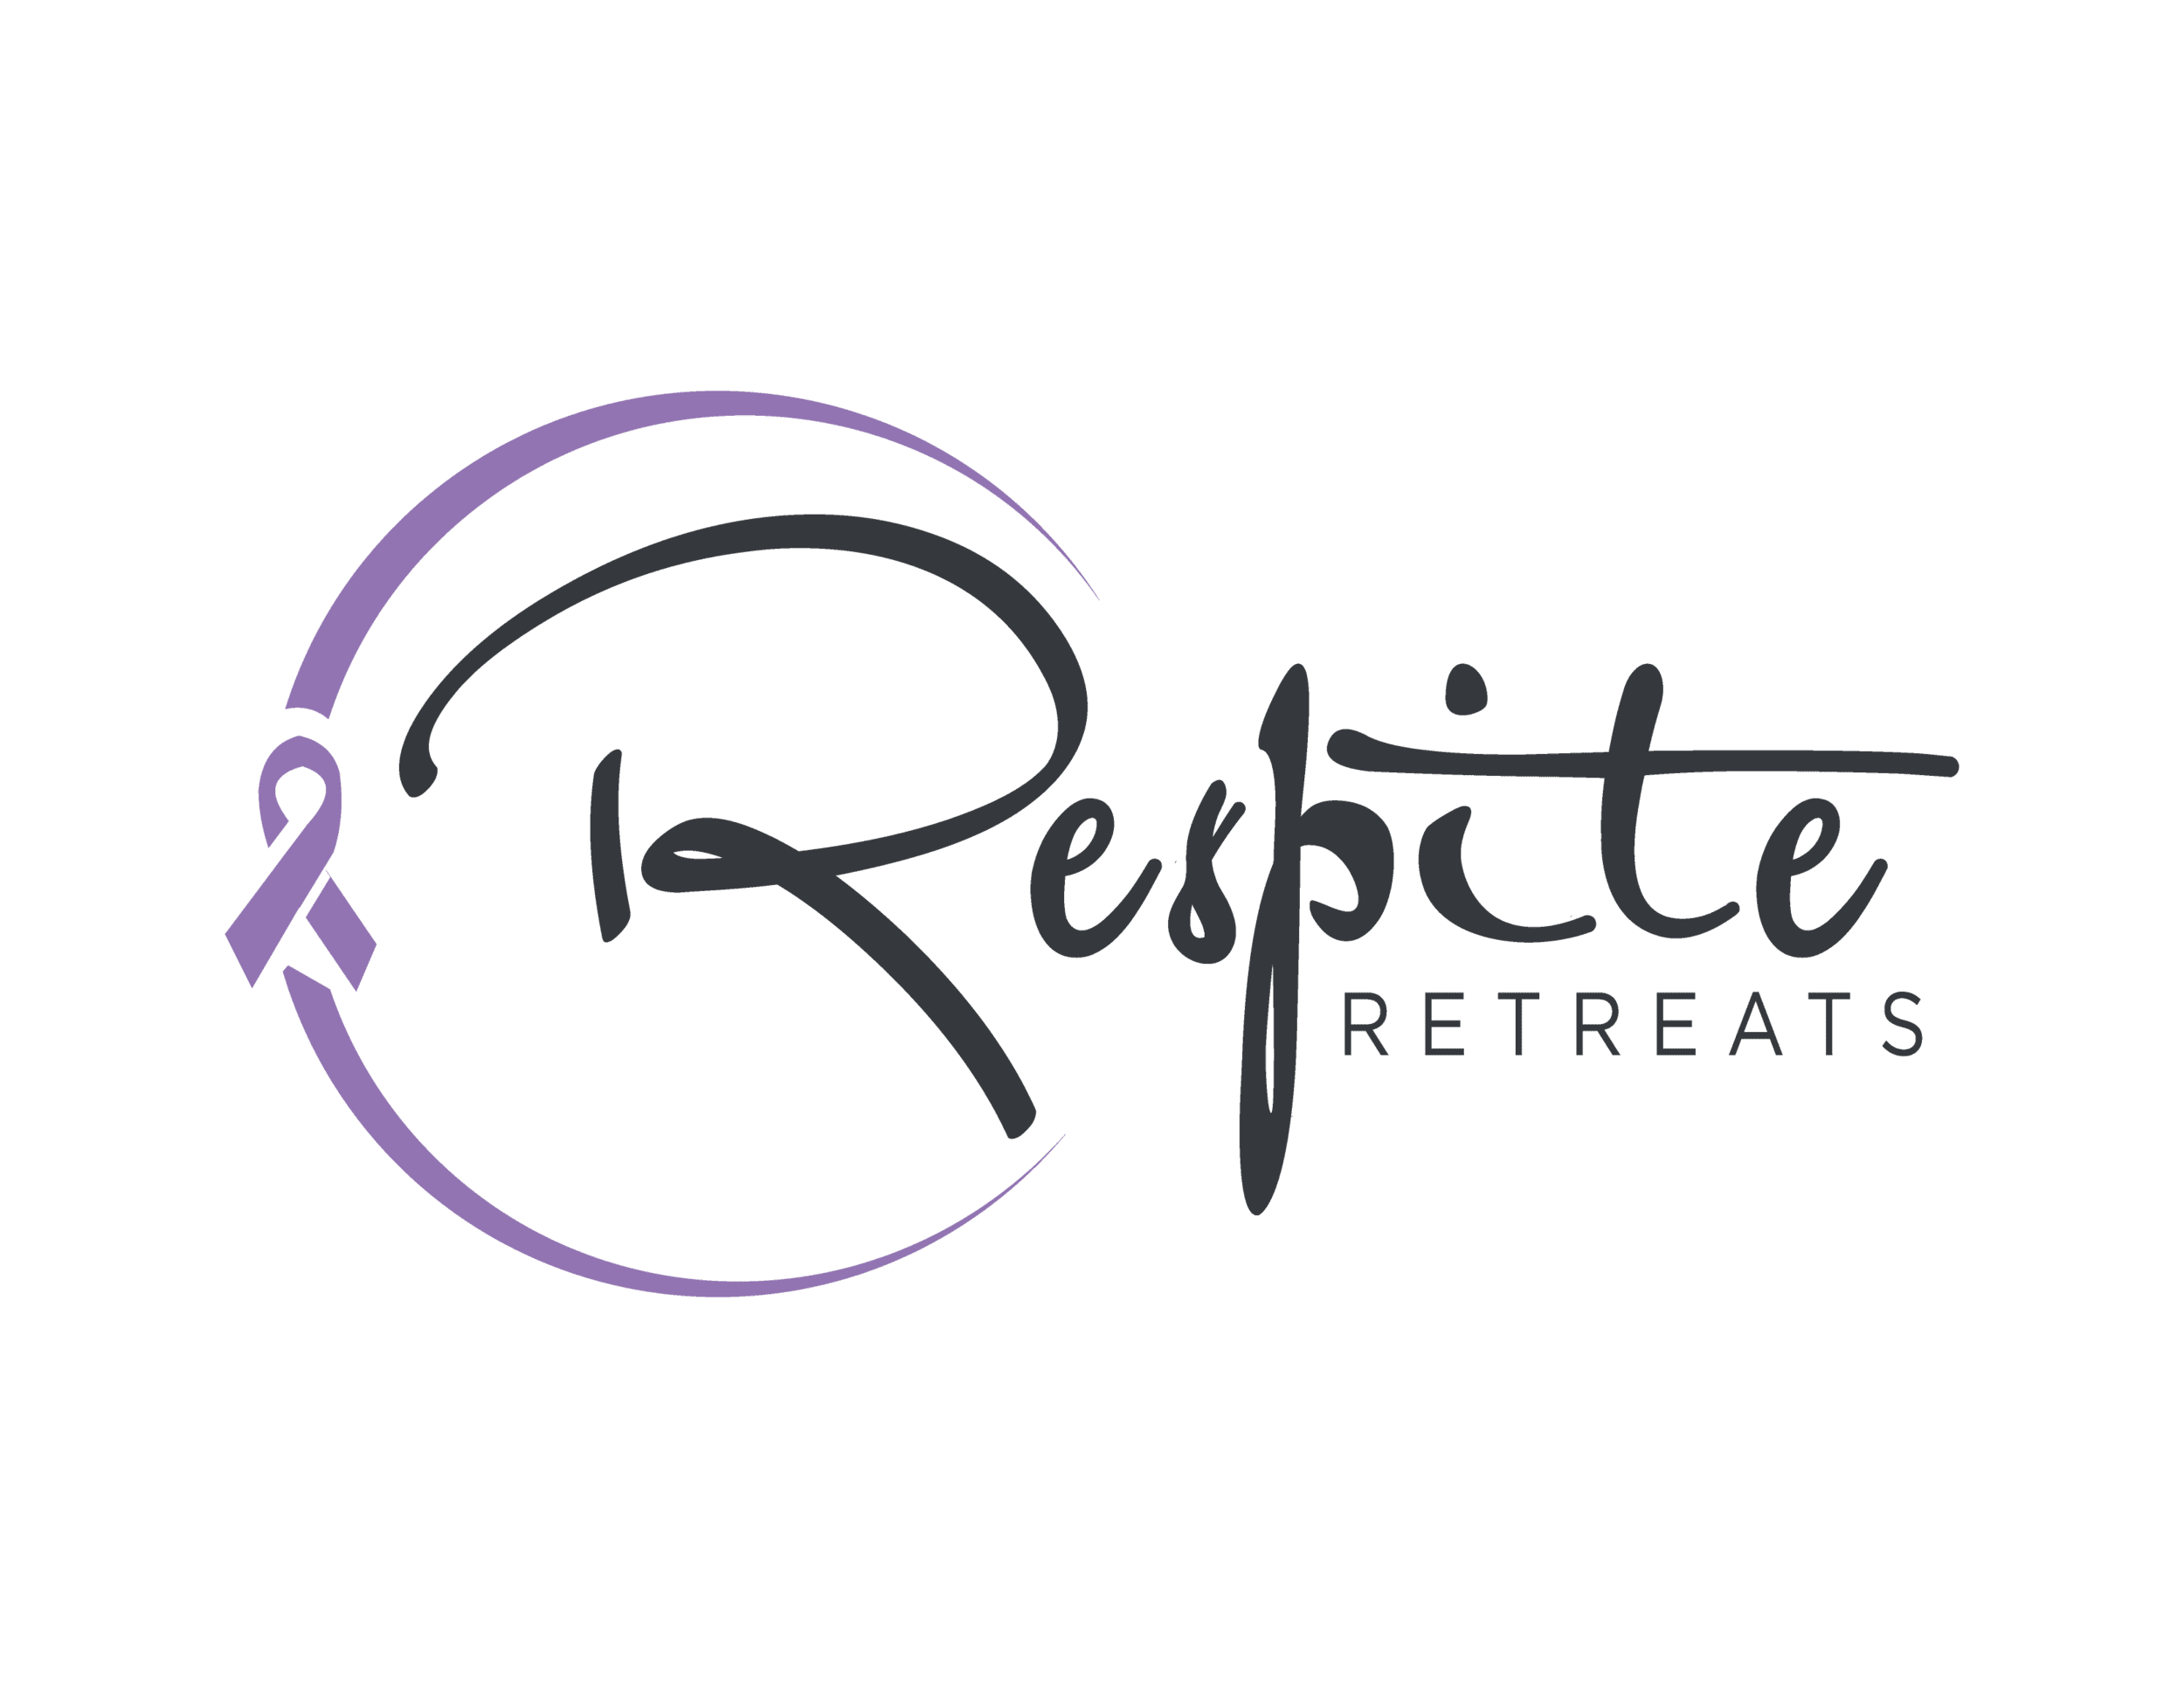 Logo of respite retreats featuring stylish lettering and a circular purple emblem.